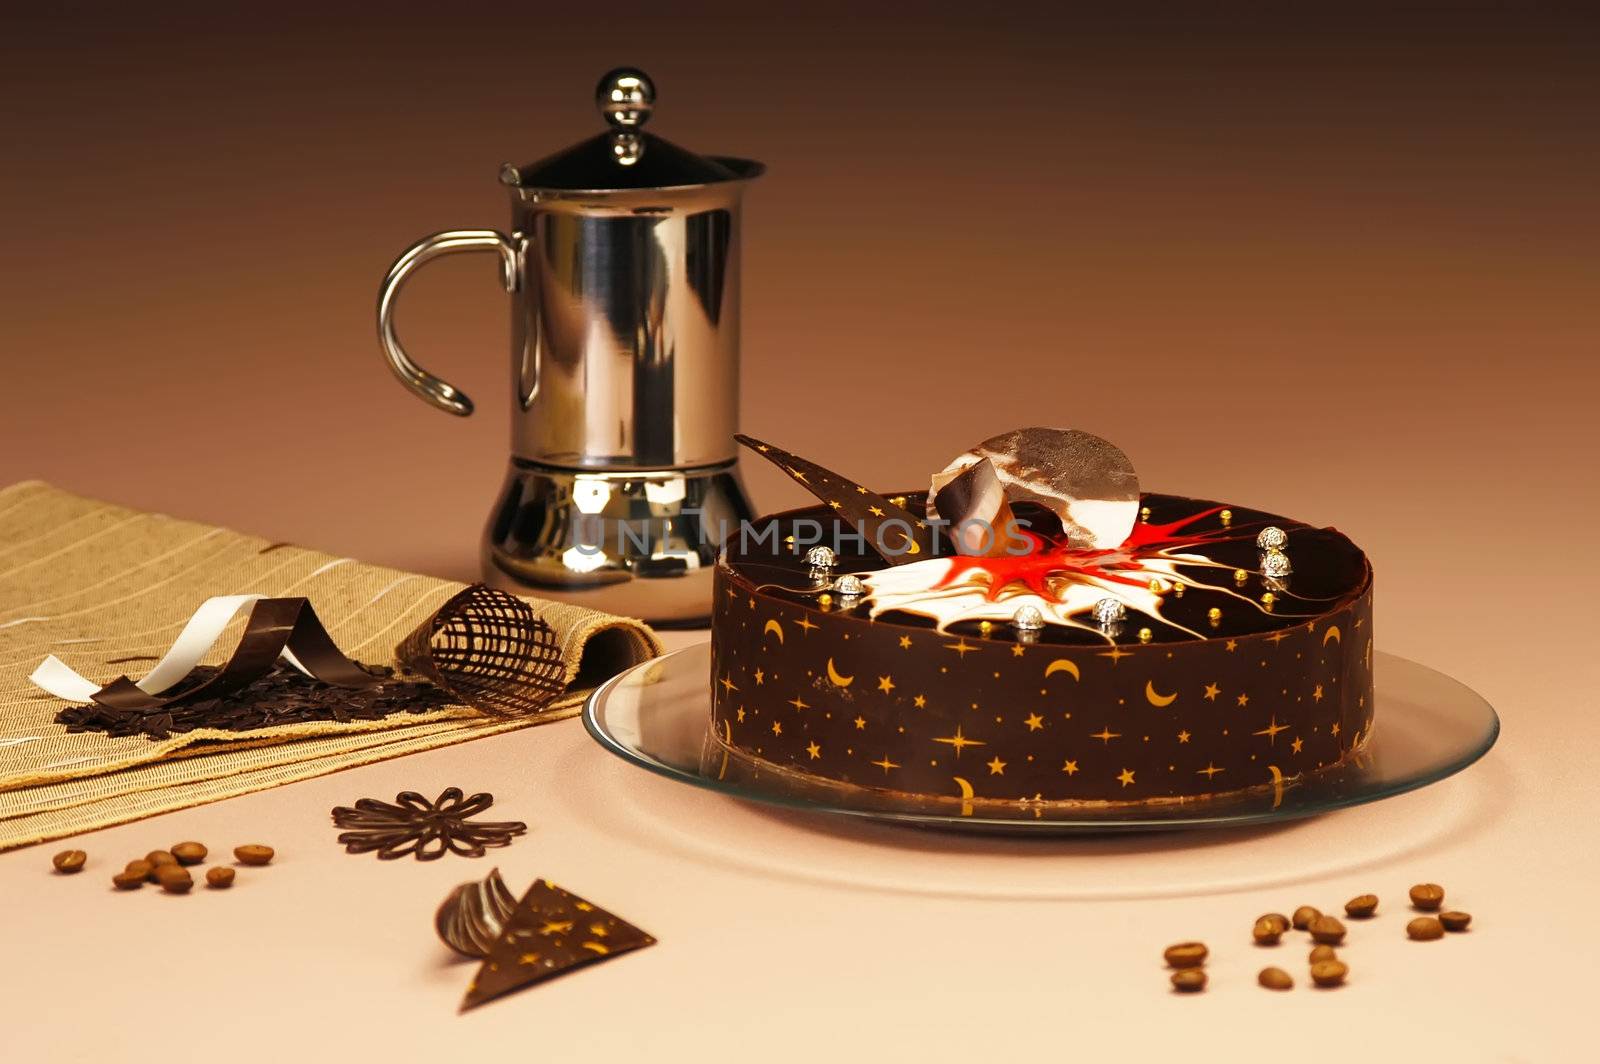 Chocolate cake on a platter with coffee